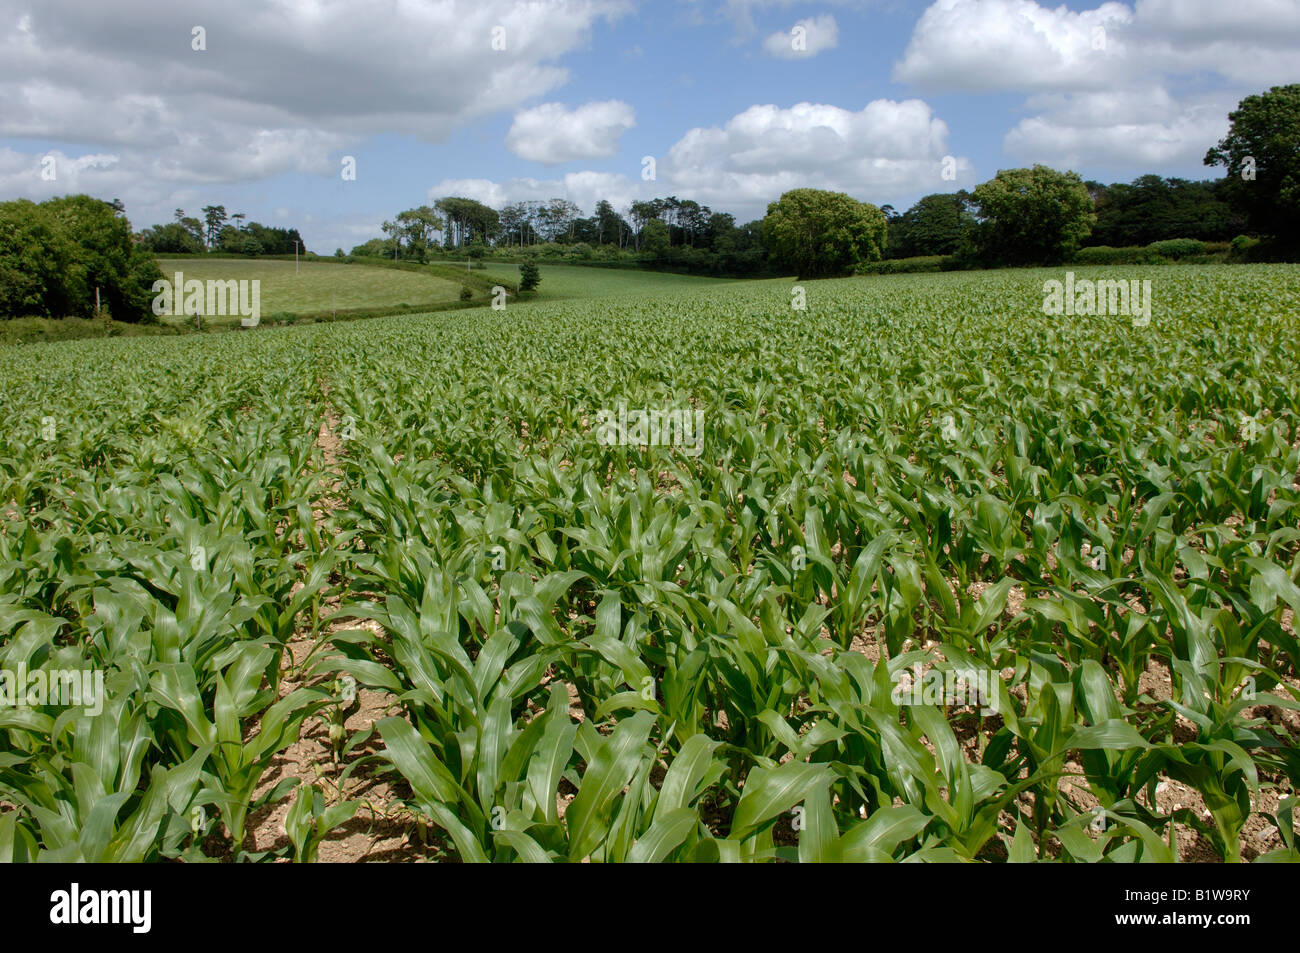 A young maize crop weed free between the rows in a large field on a fine summer day Stock Photo